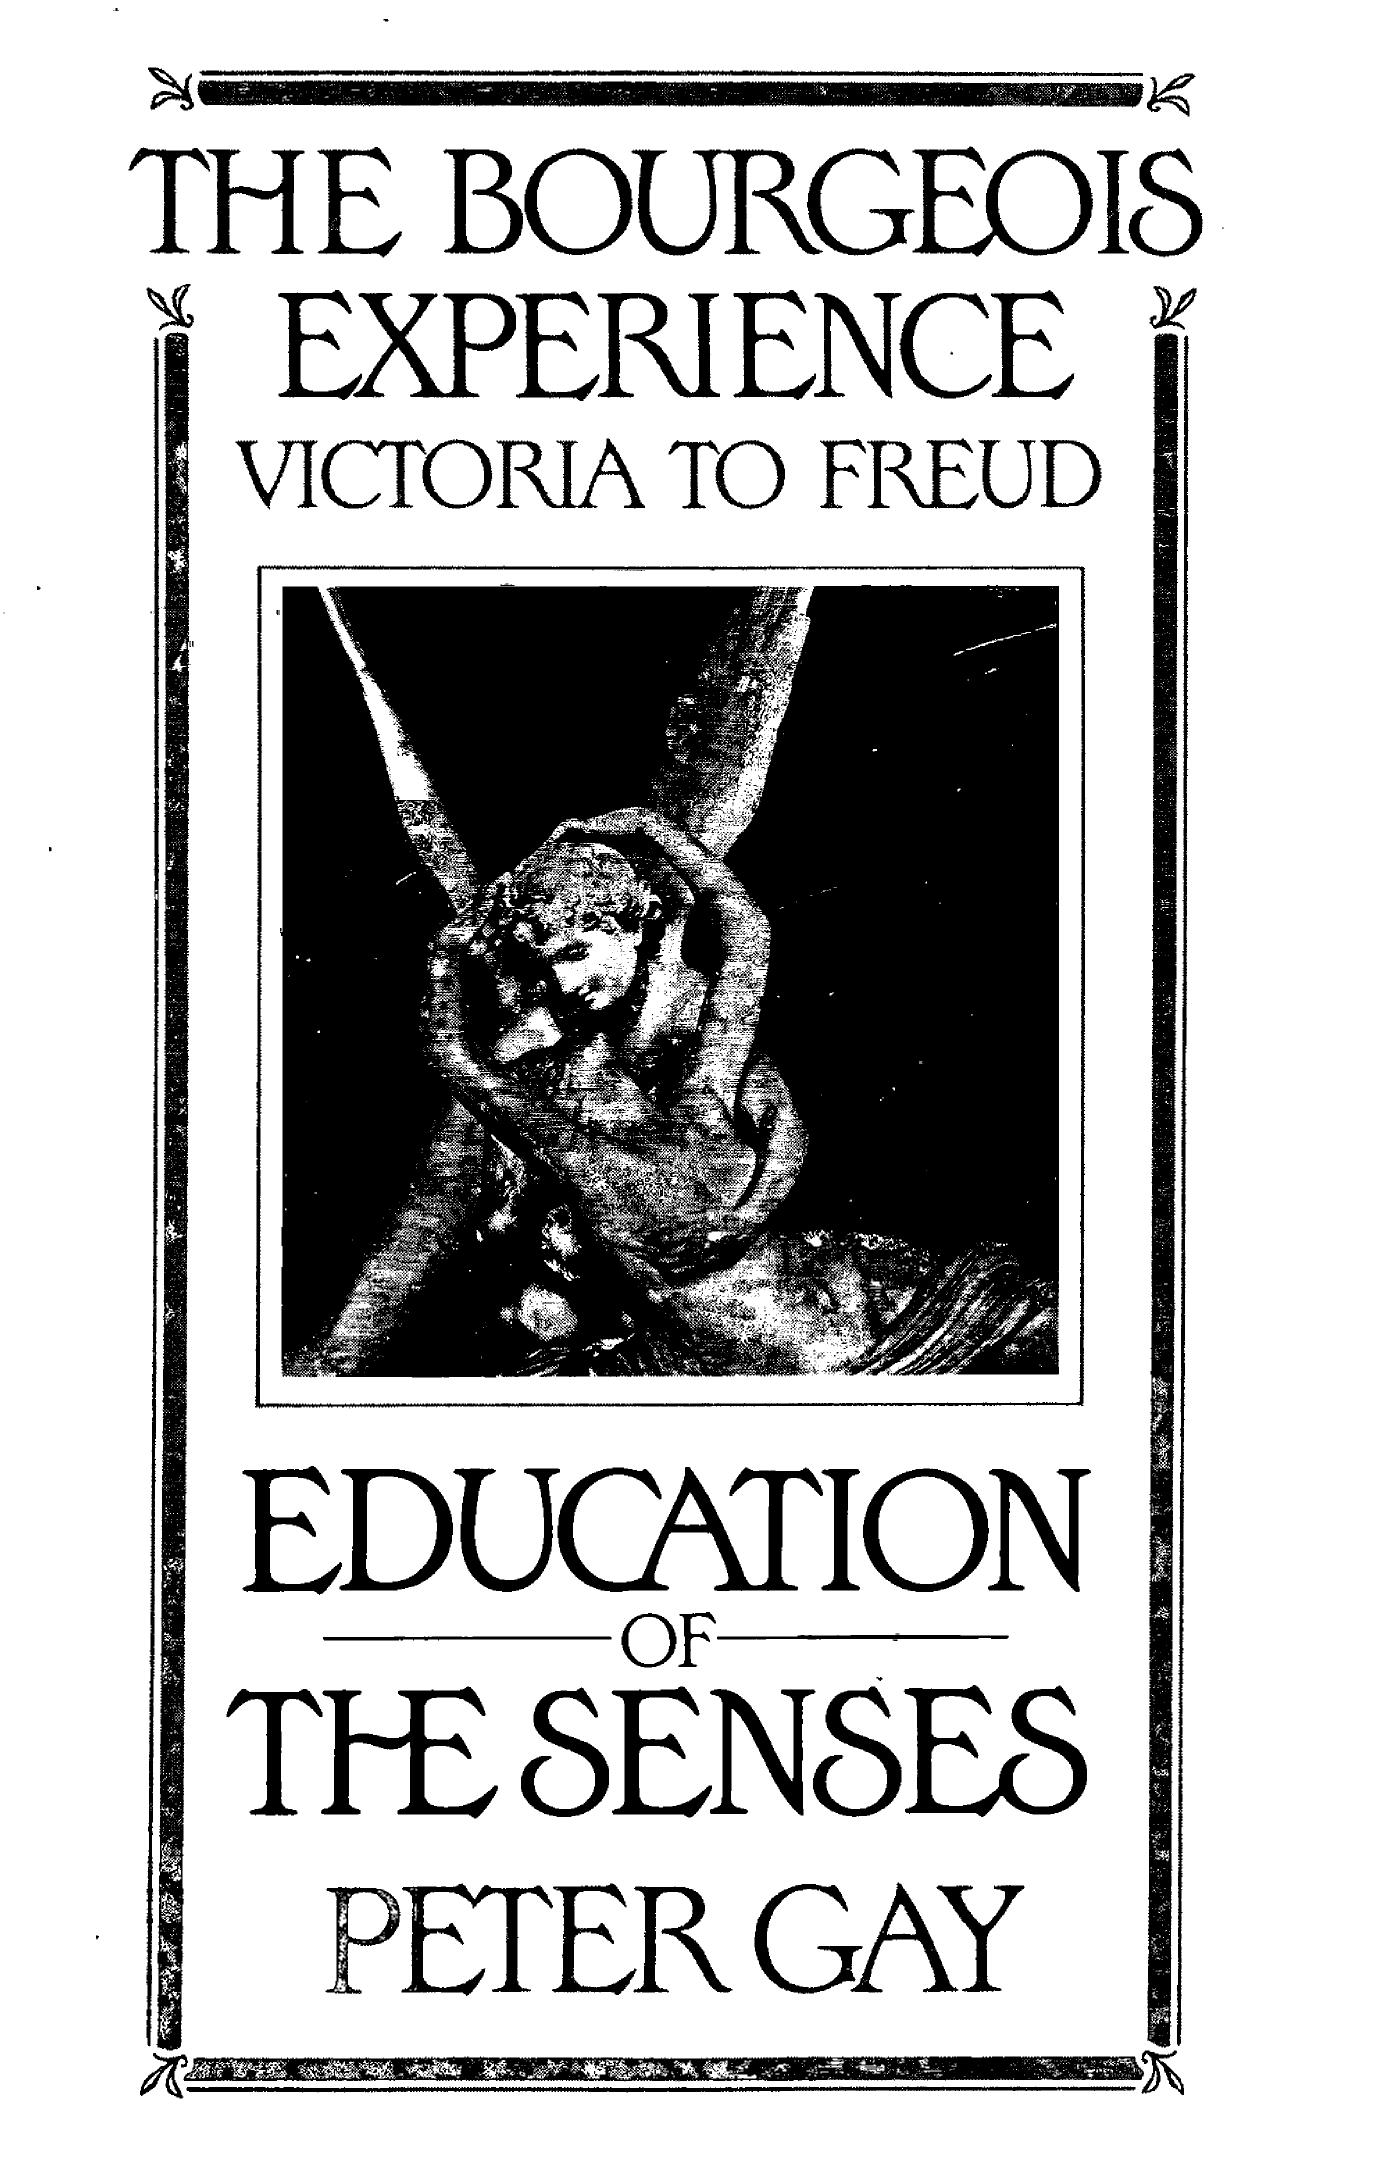 Education of the Senses by Peter Gay